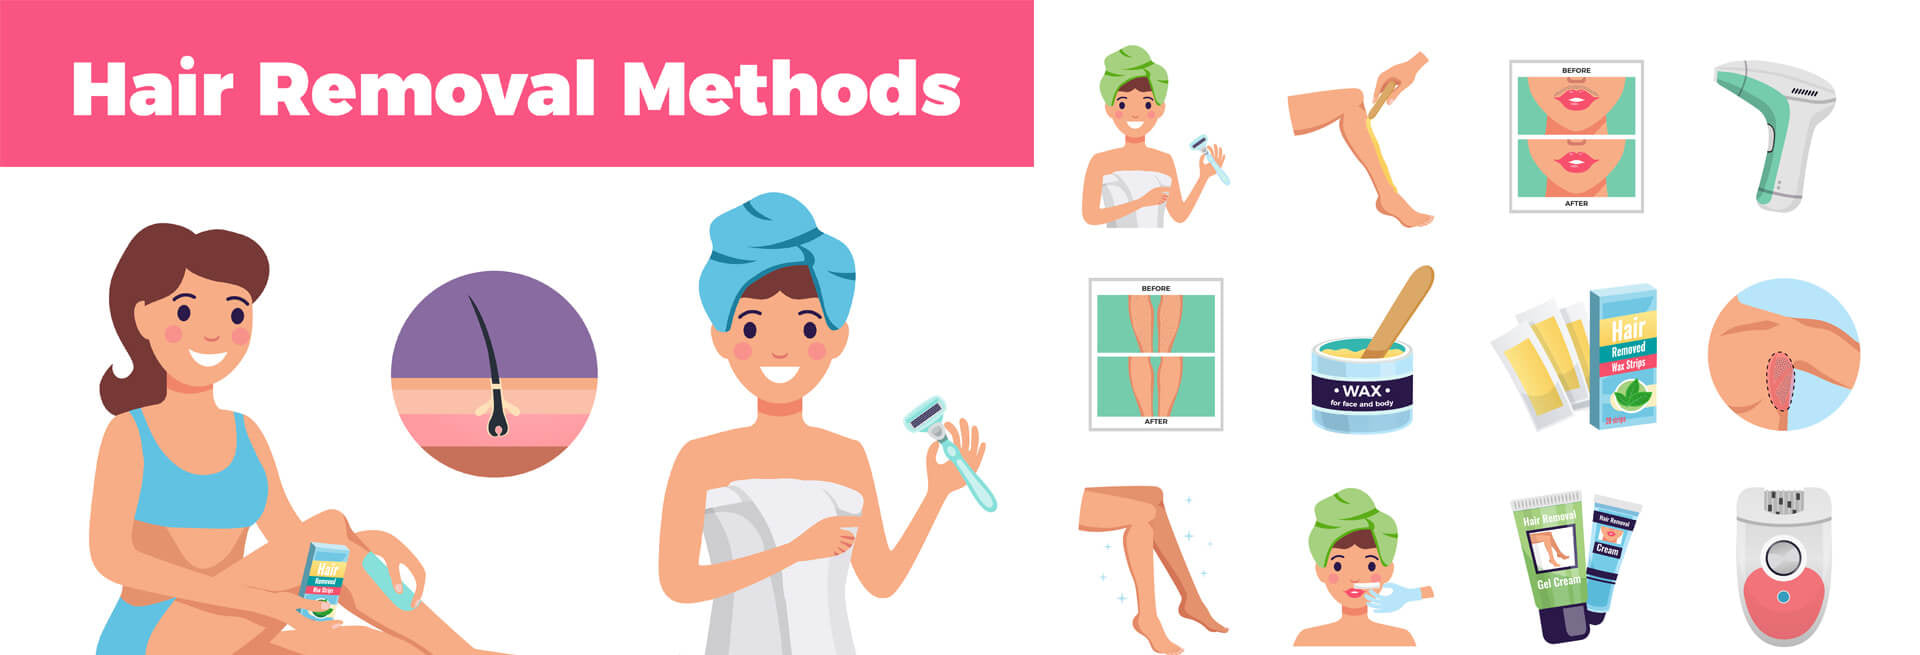 Hair Removal Techniques & Methods for Women